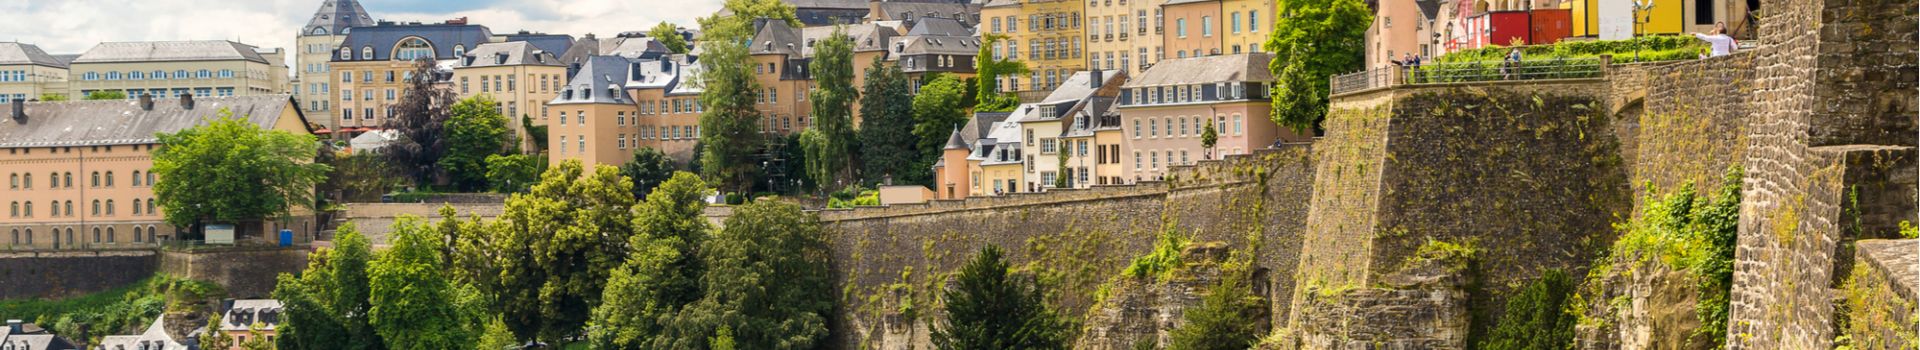 Holidays to Luxembourg with Cassidy Travel